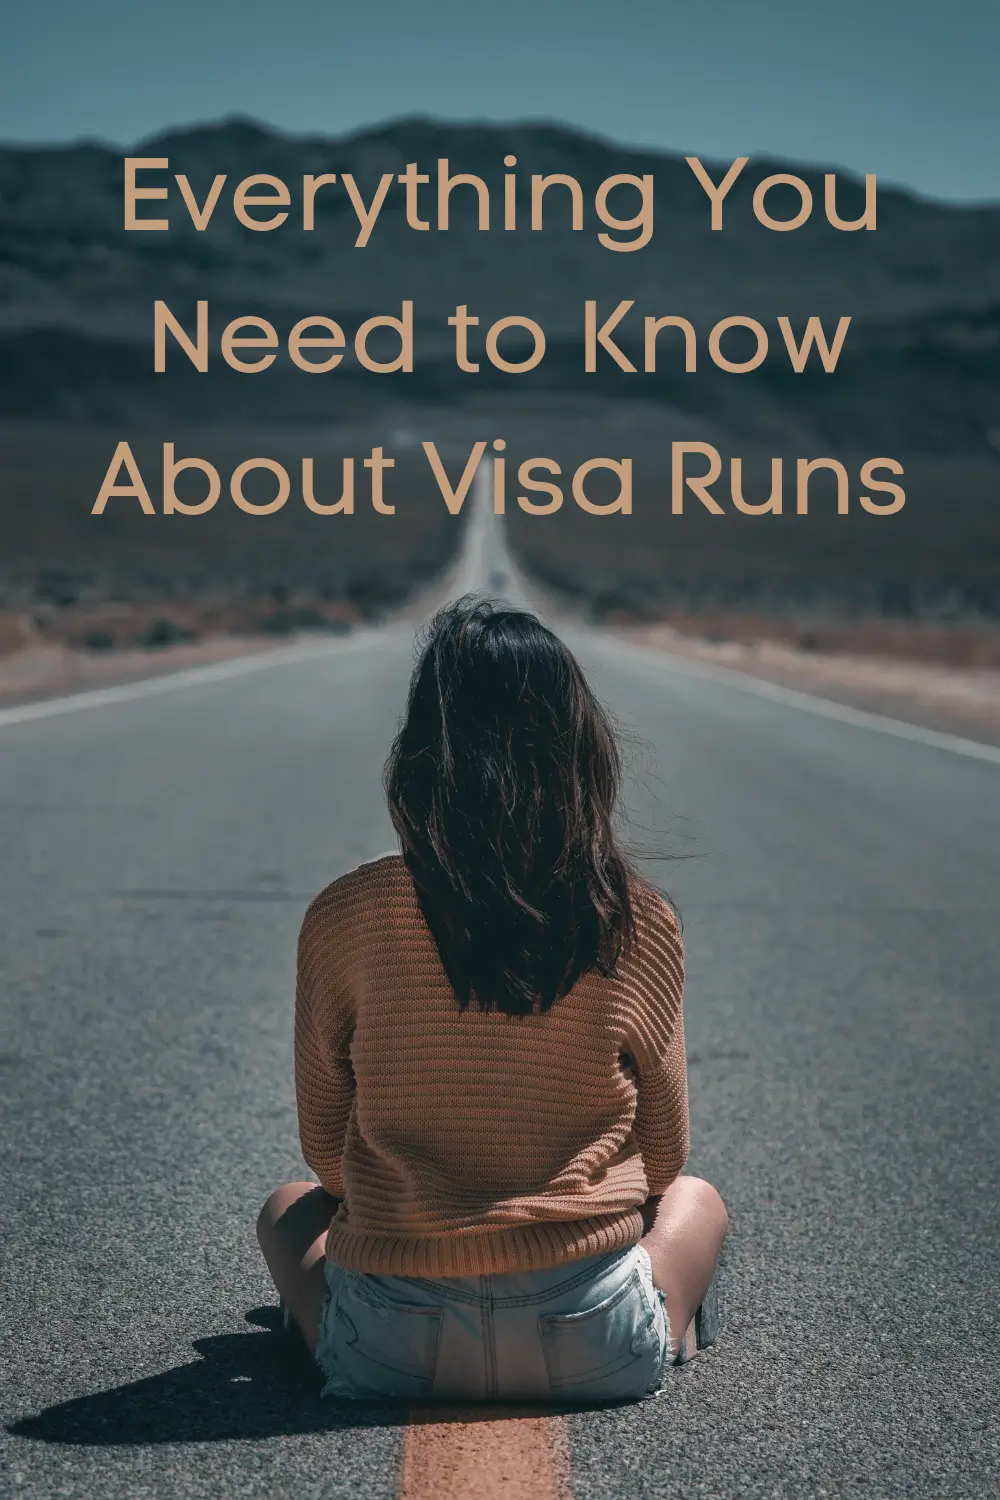 Everything You Need to Know About Visa Runs